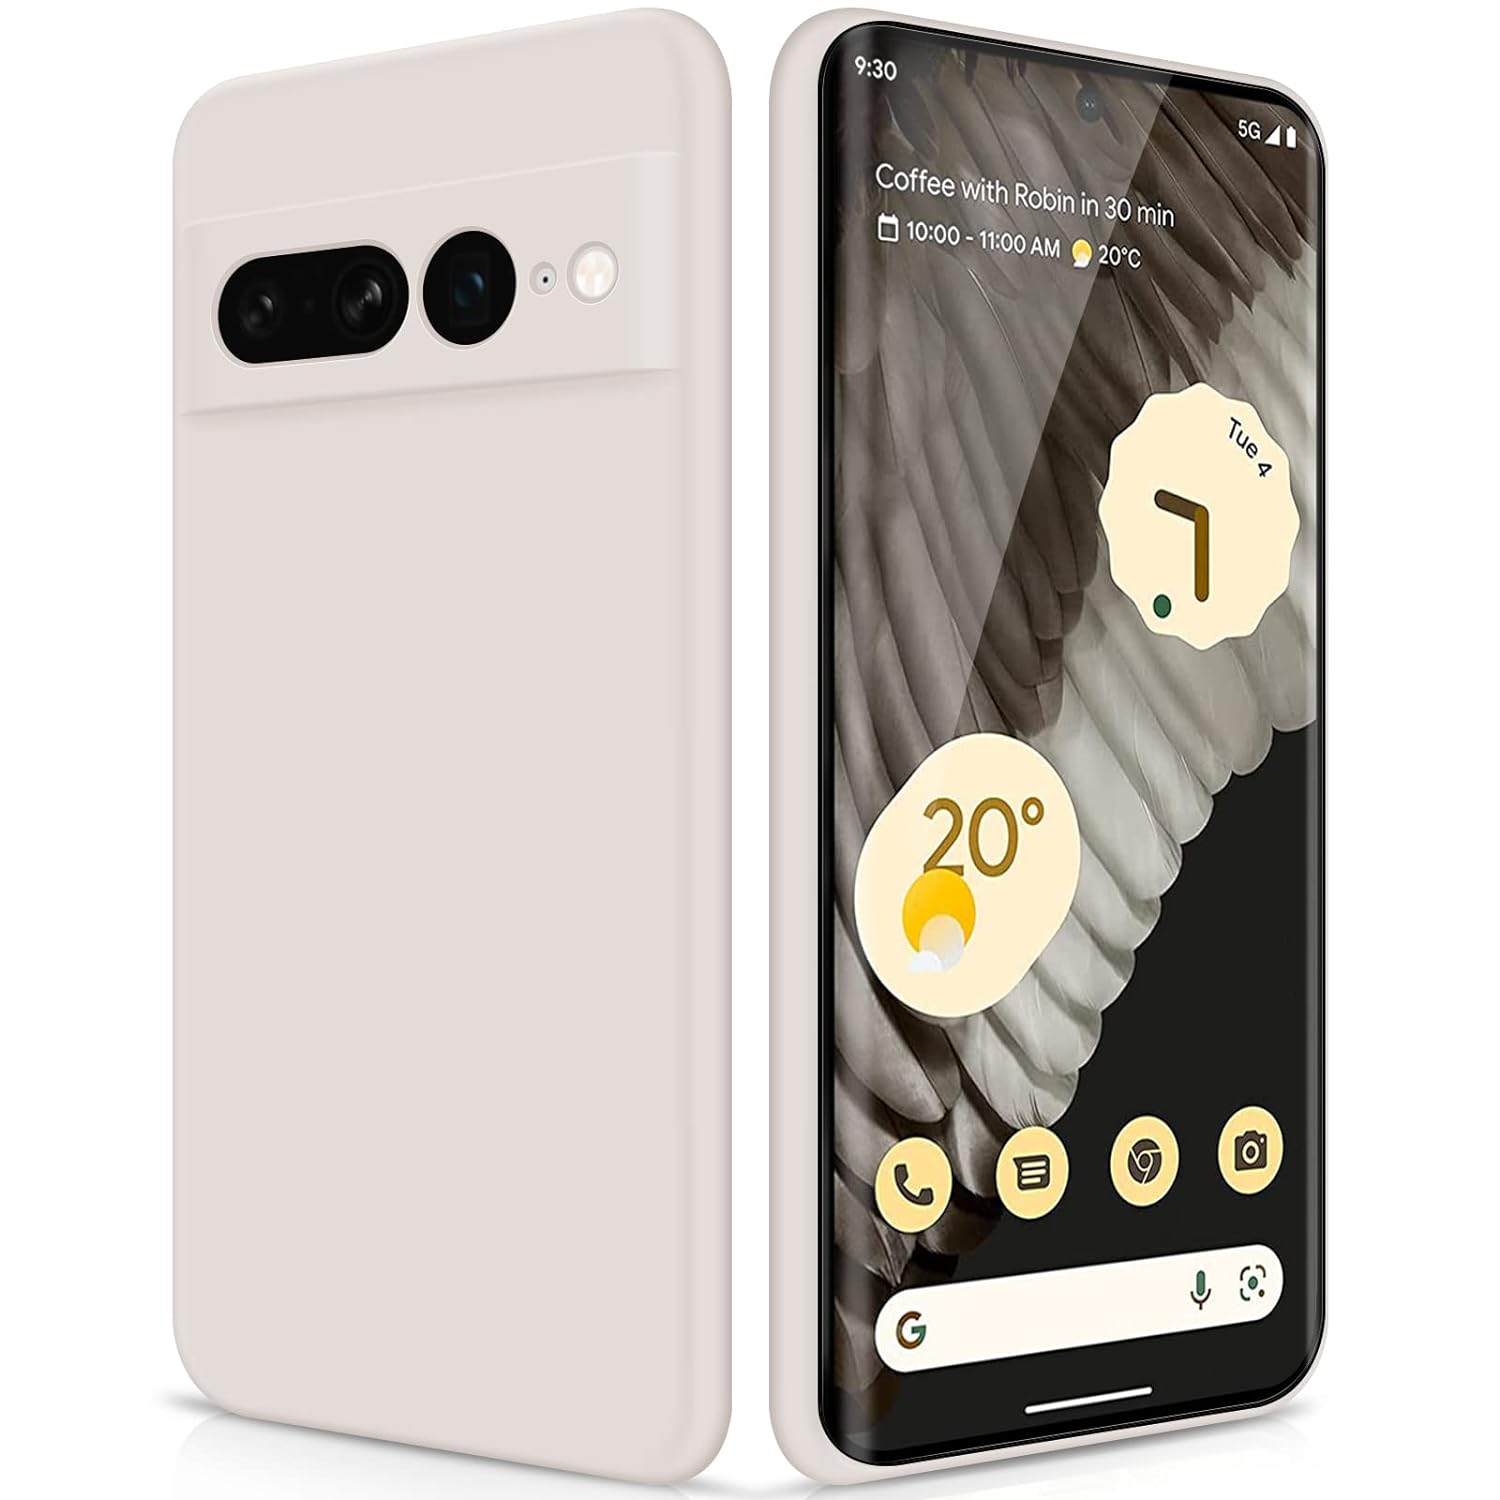 GiiYoon Case Compatible with Google Pixel 7 Pro, Silky-Soft Touch Full-Body Protective Phone Silicone Case, Shockproof Cover with Microfiber Lining, White